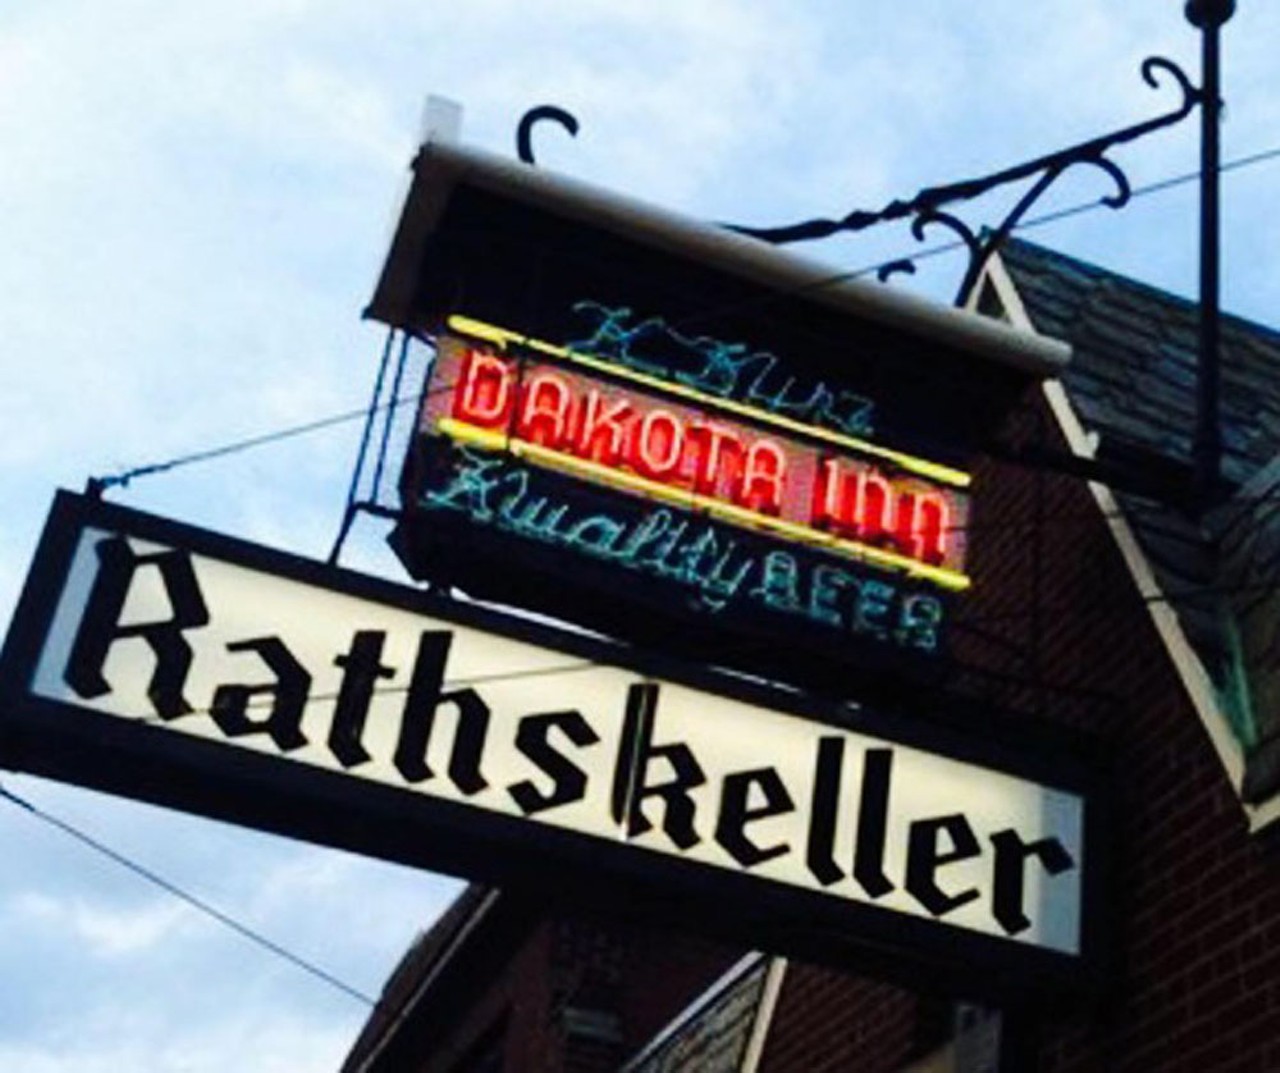  Dakota Inn Rathskeller Oktoberfest
Every weekend in October
@ Dakota Inn
17324 John R St.
Squeeze into your Lederhosen and Dirndl and swing by this old school Bavarian watering hole for its month-plus long Oktoberfest festivities. Featuring the sounds of the Dick Wagner & Die Rhinelander band, Immigrant Sons, Harry Lutz & Die Fahrenden Musikanten, and Tommy Schober & Sorgenbrecher Band. Shows start at 8 p.m. and run through midnight. $3 admission and don't forget your Chicken Hat.